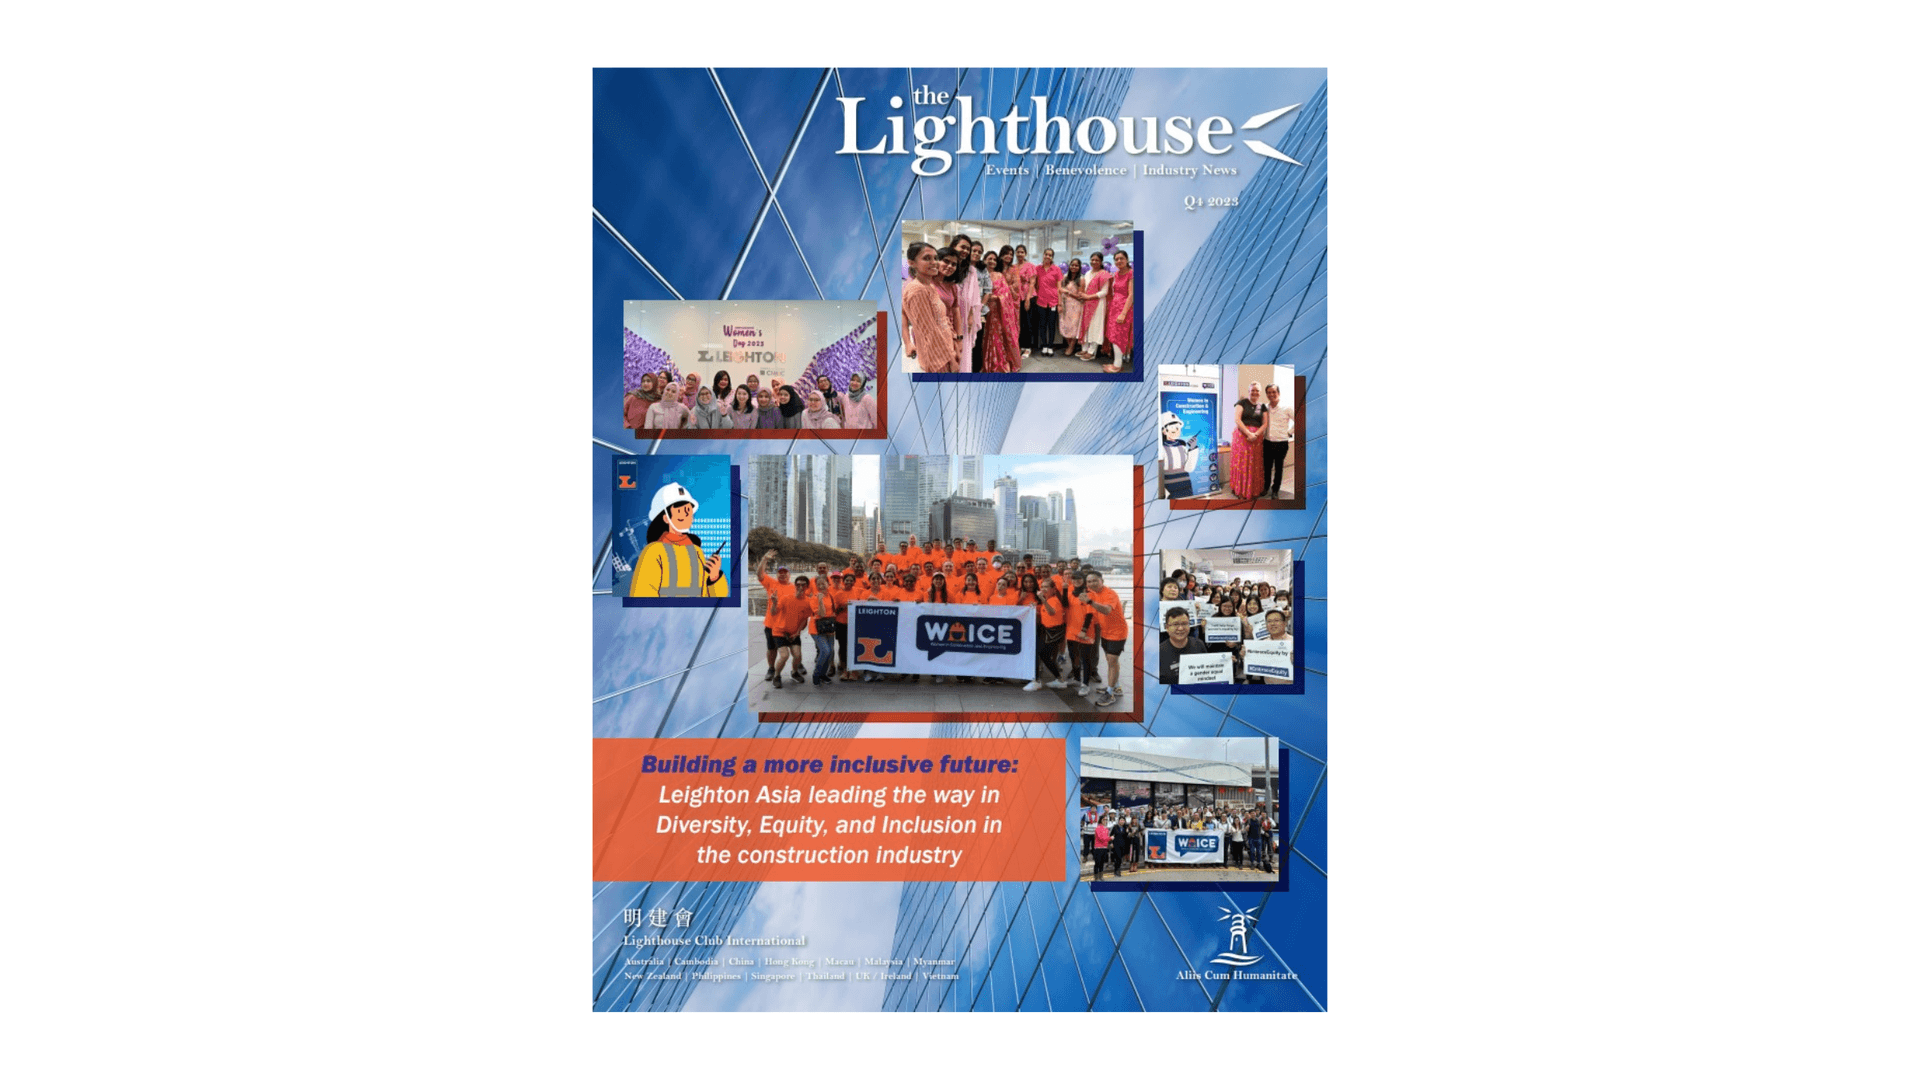 Building a more inclusive future: Leighton Asia leading the way in DEI in construction industry